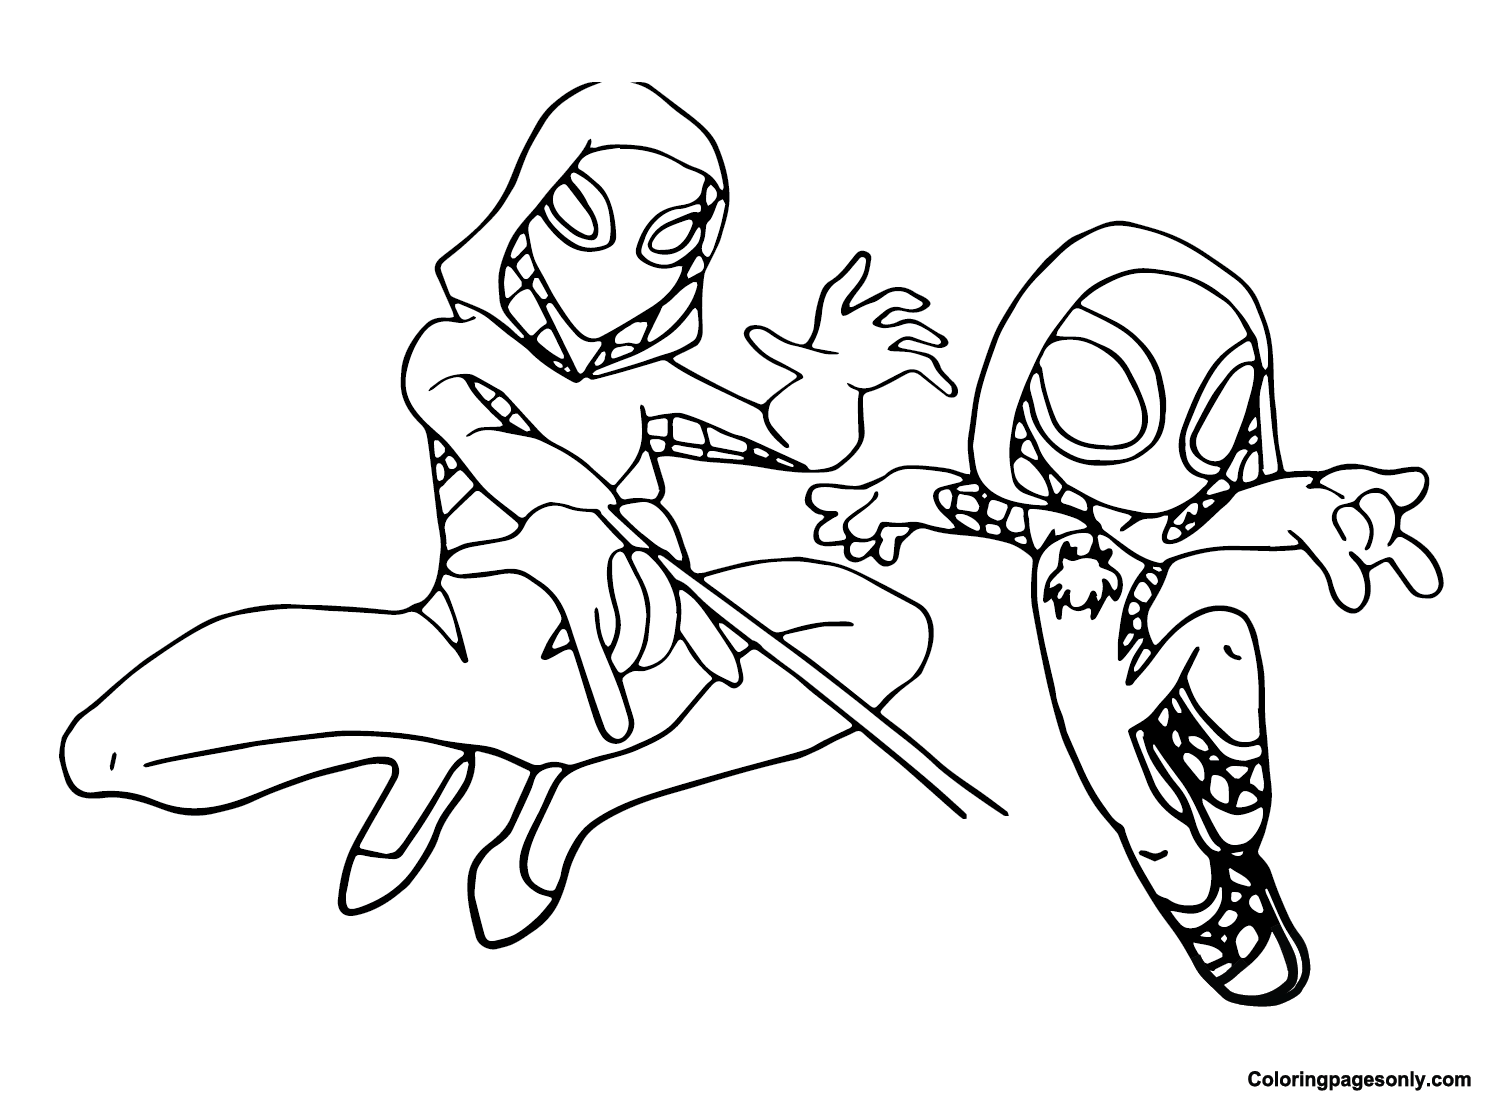 Ghost Spider Images Coloring Page